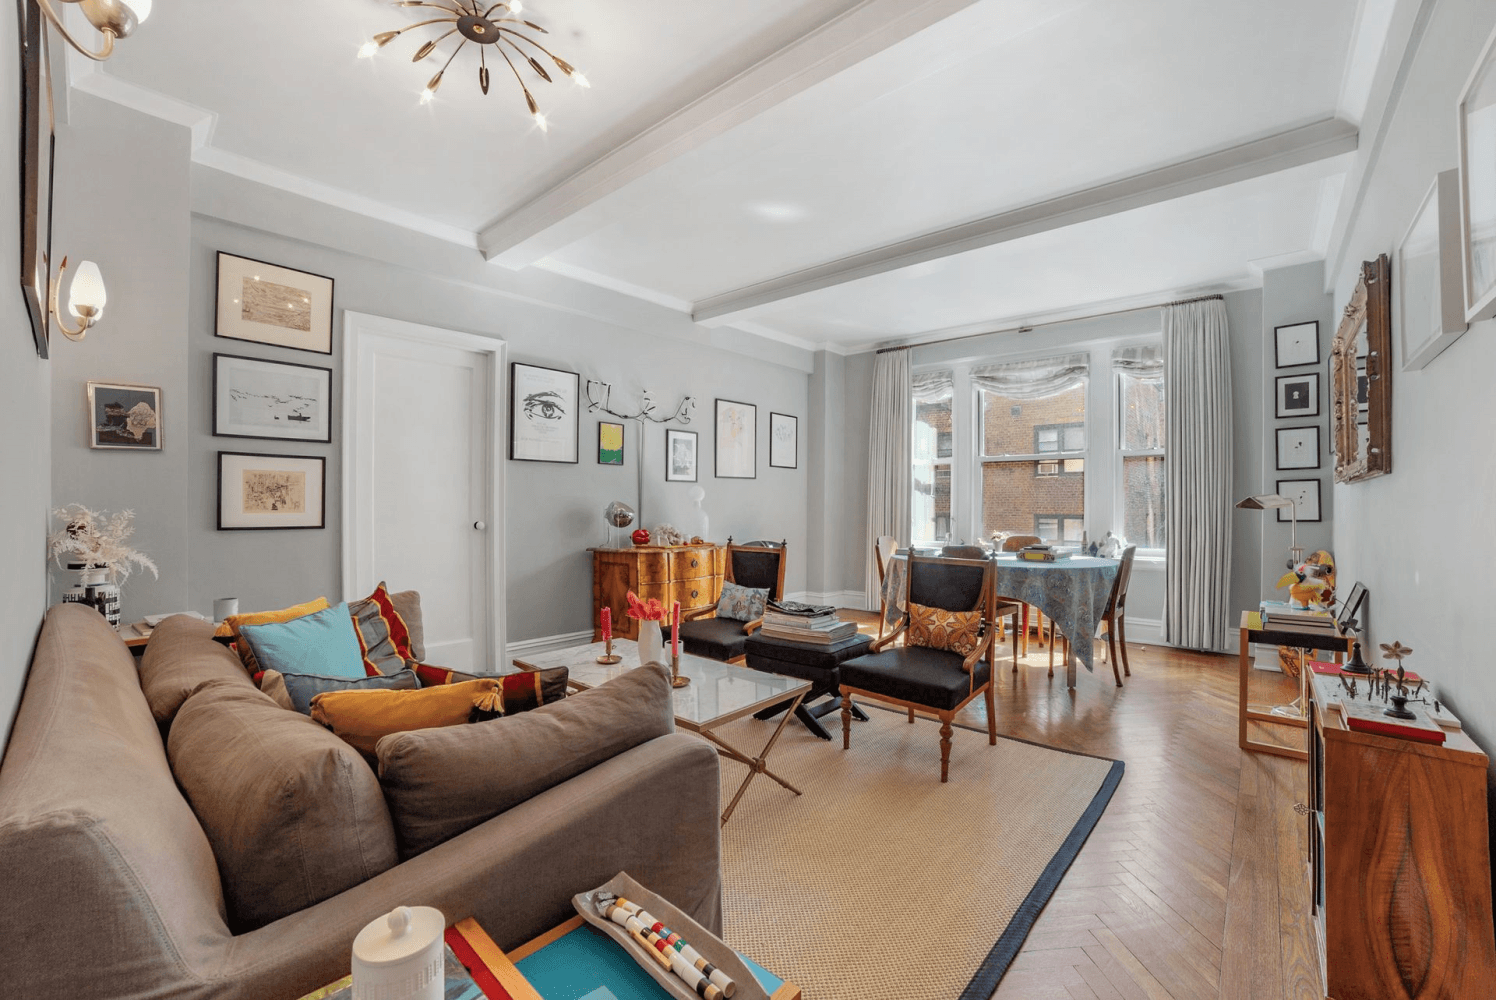 This elegant prewar and centrally located apartment, is being sold fully furnished just bring your personal belongings and start enjoying NYC living.